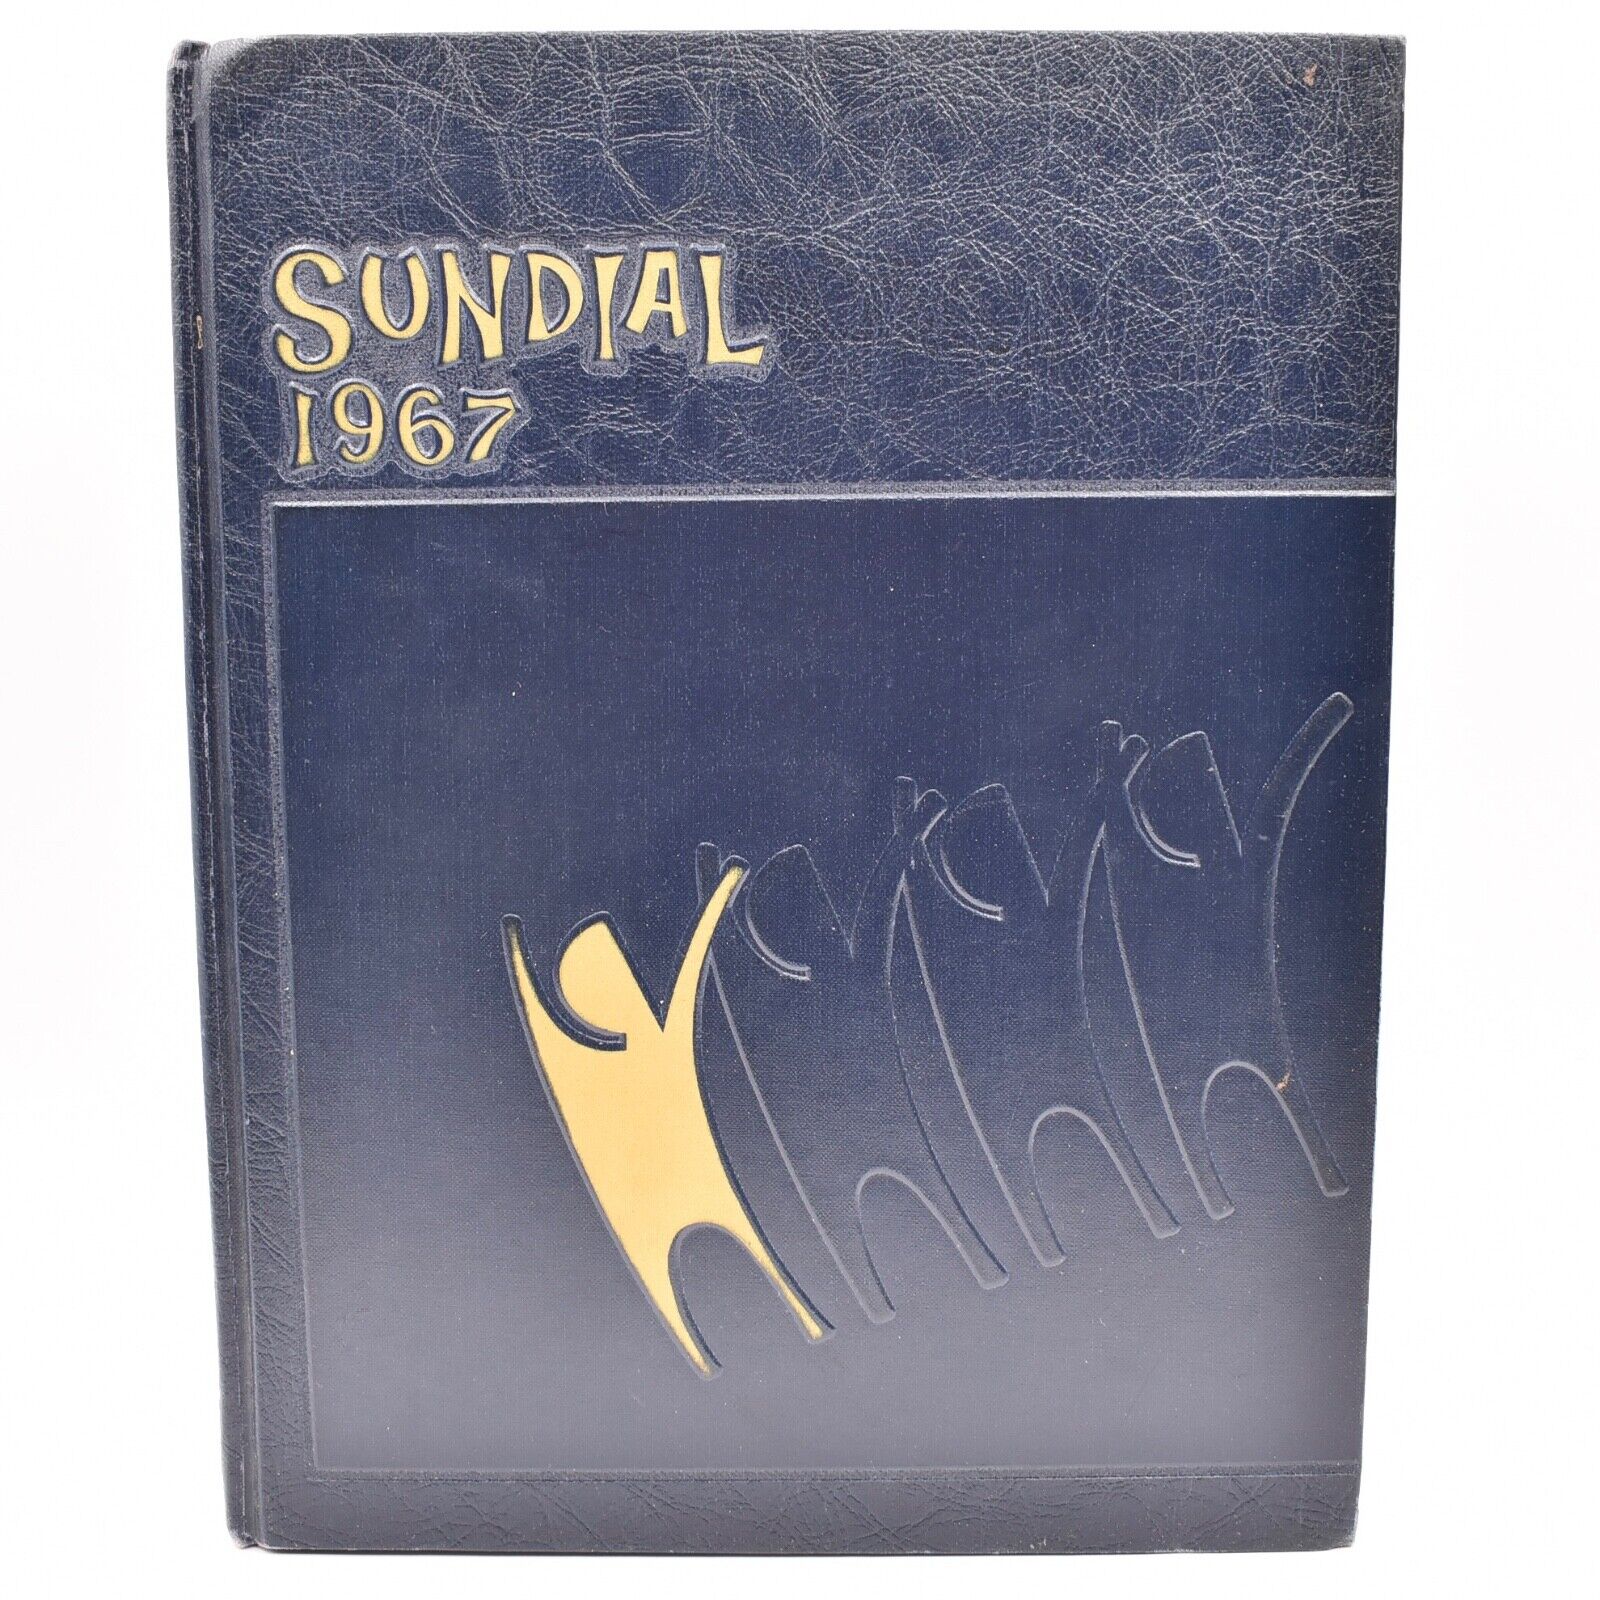 Montreat College 1967 The Sun Dial Annual / Yearbook, Montreat, North Carolina